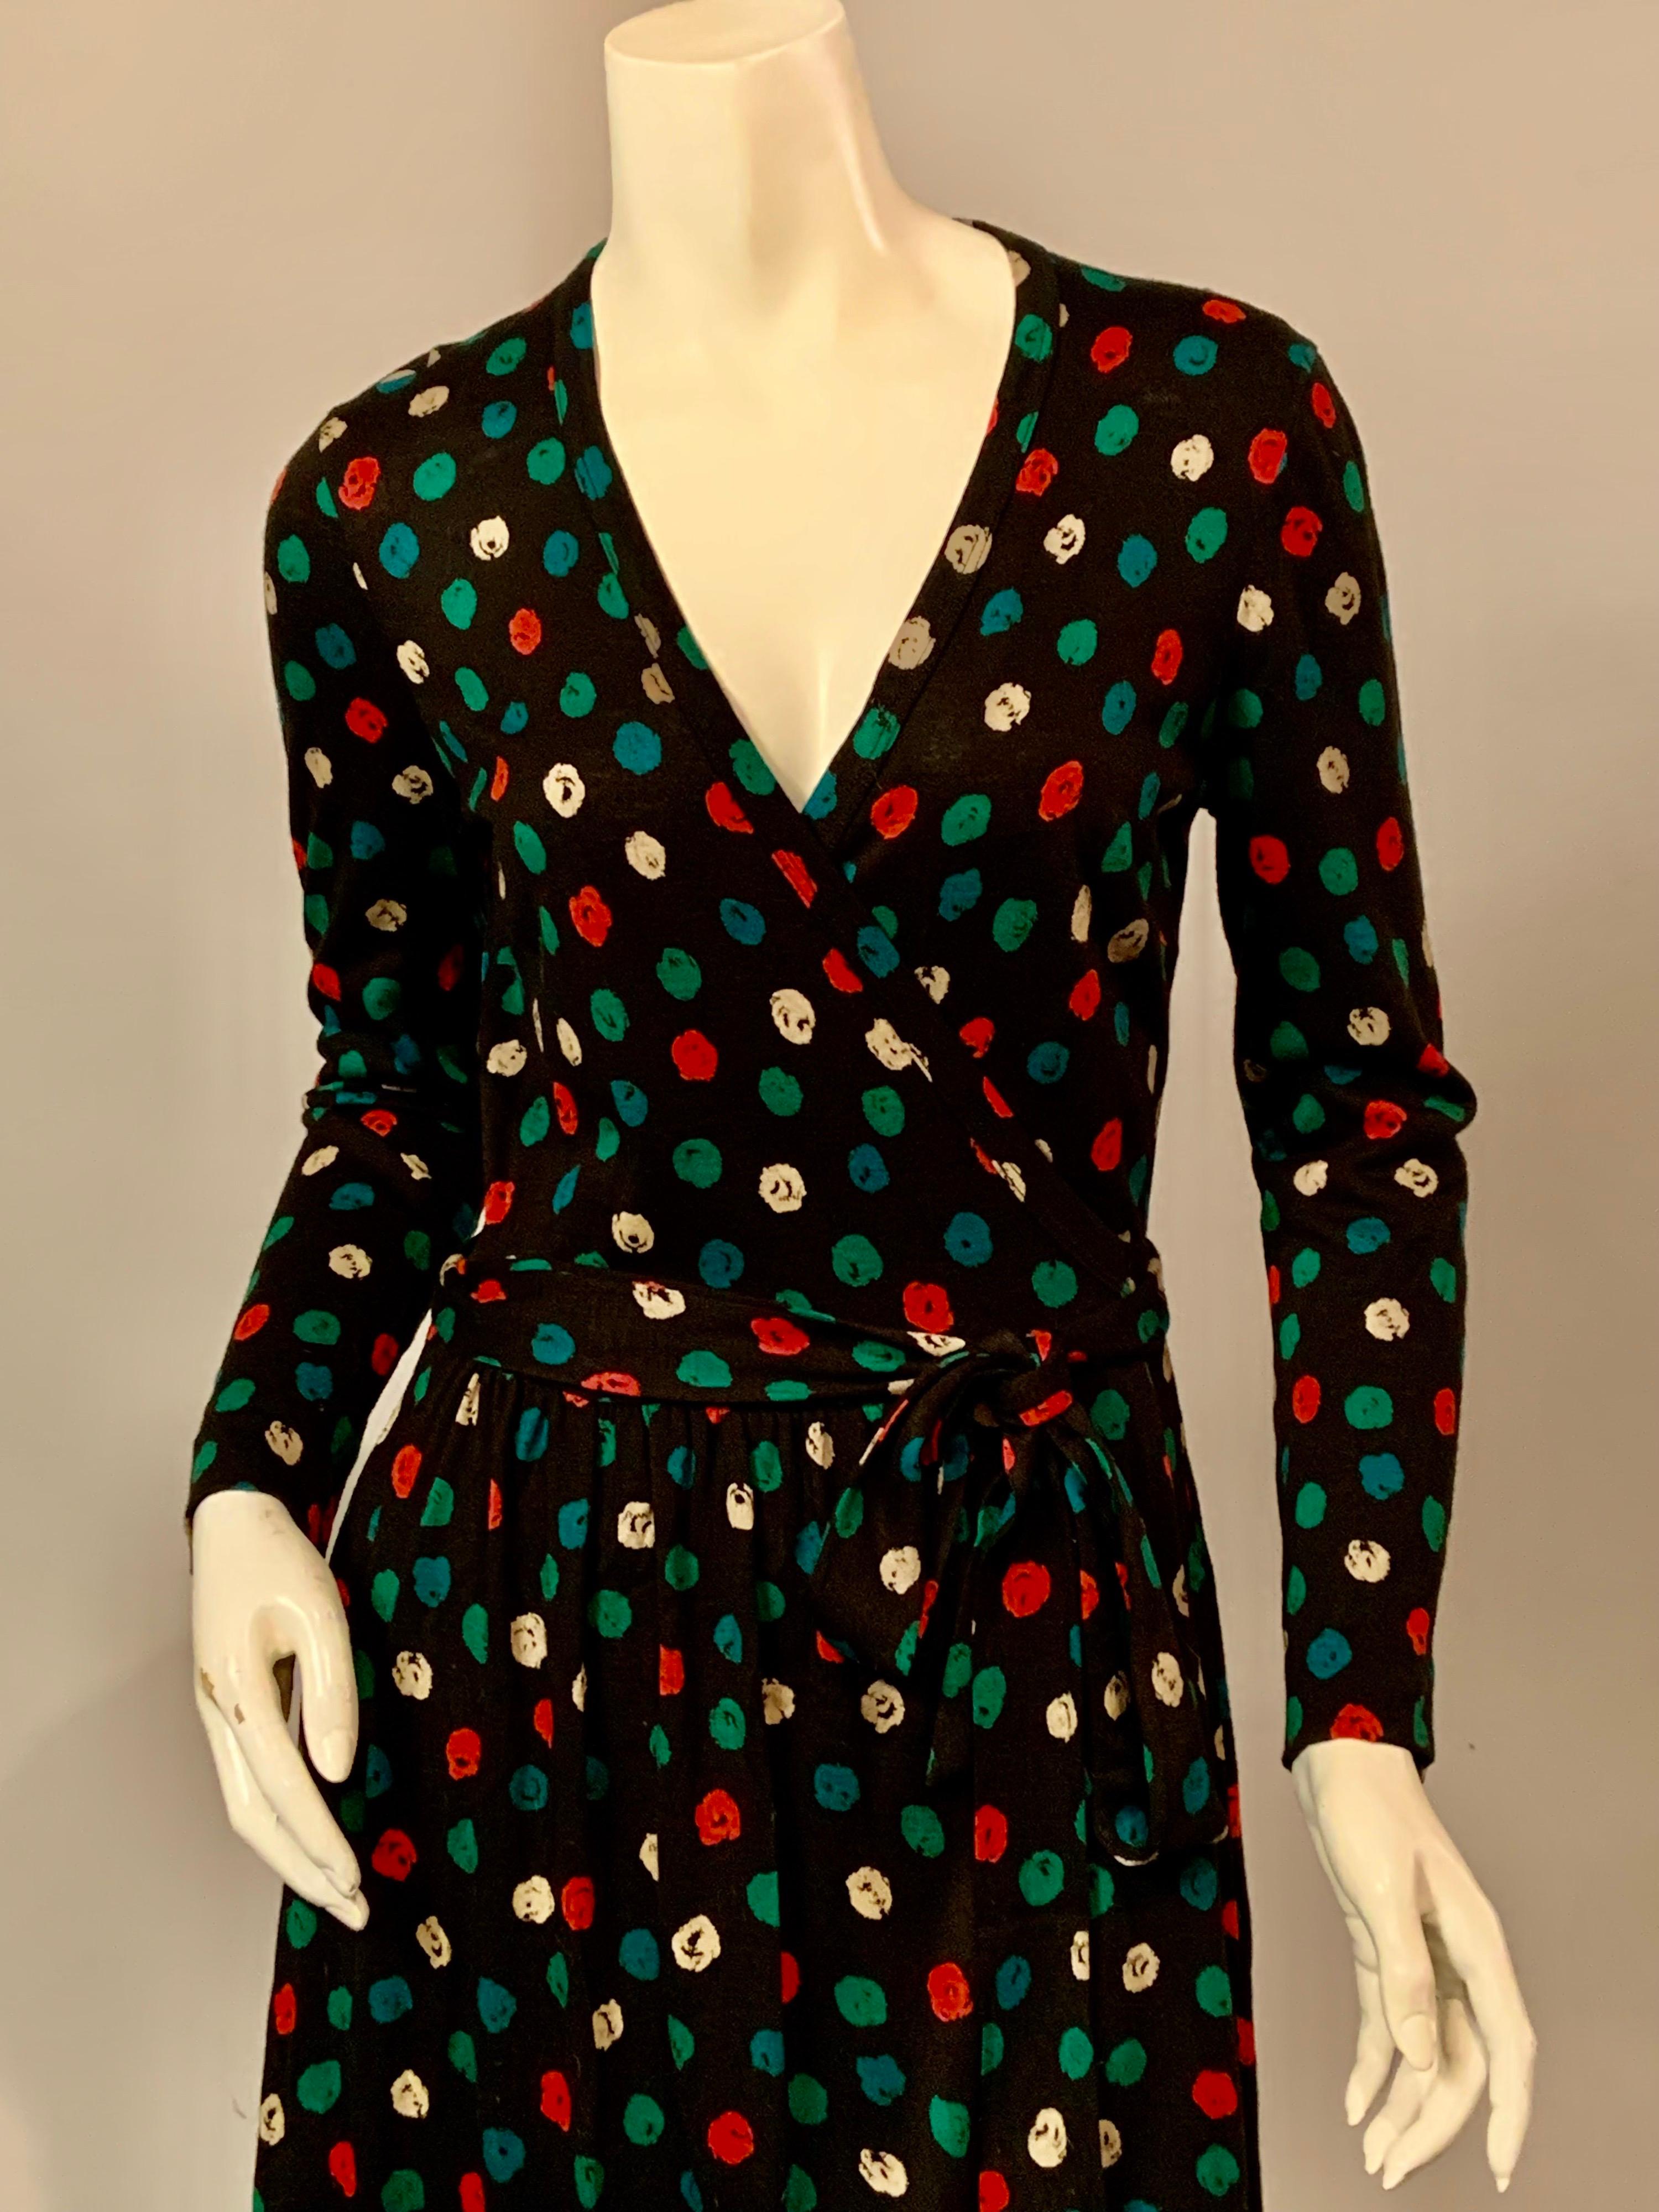 Dark chocolate brown jersey is patterned with an abstract floral design red, green cream and teal.  The dress is the classic wrap design made famous by DVF in the 1970's.  A V shaped neckline, long sleeves and a slightly gathered skirt with long